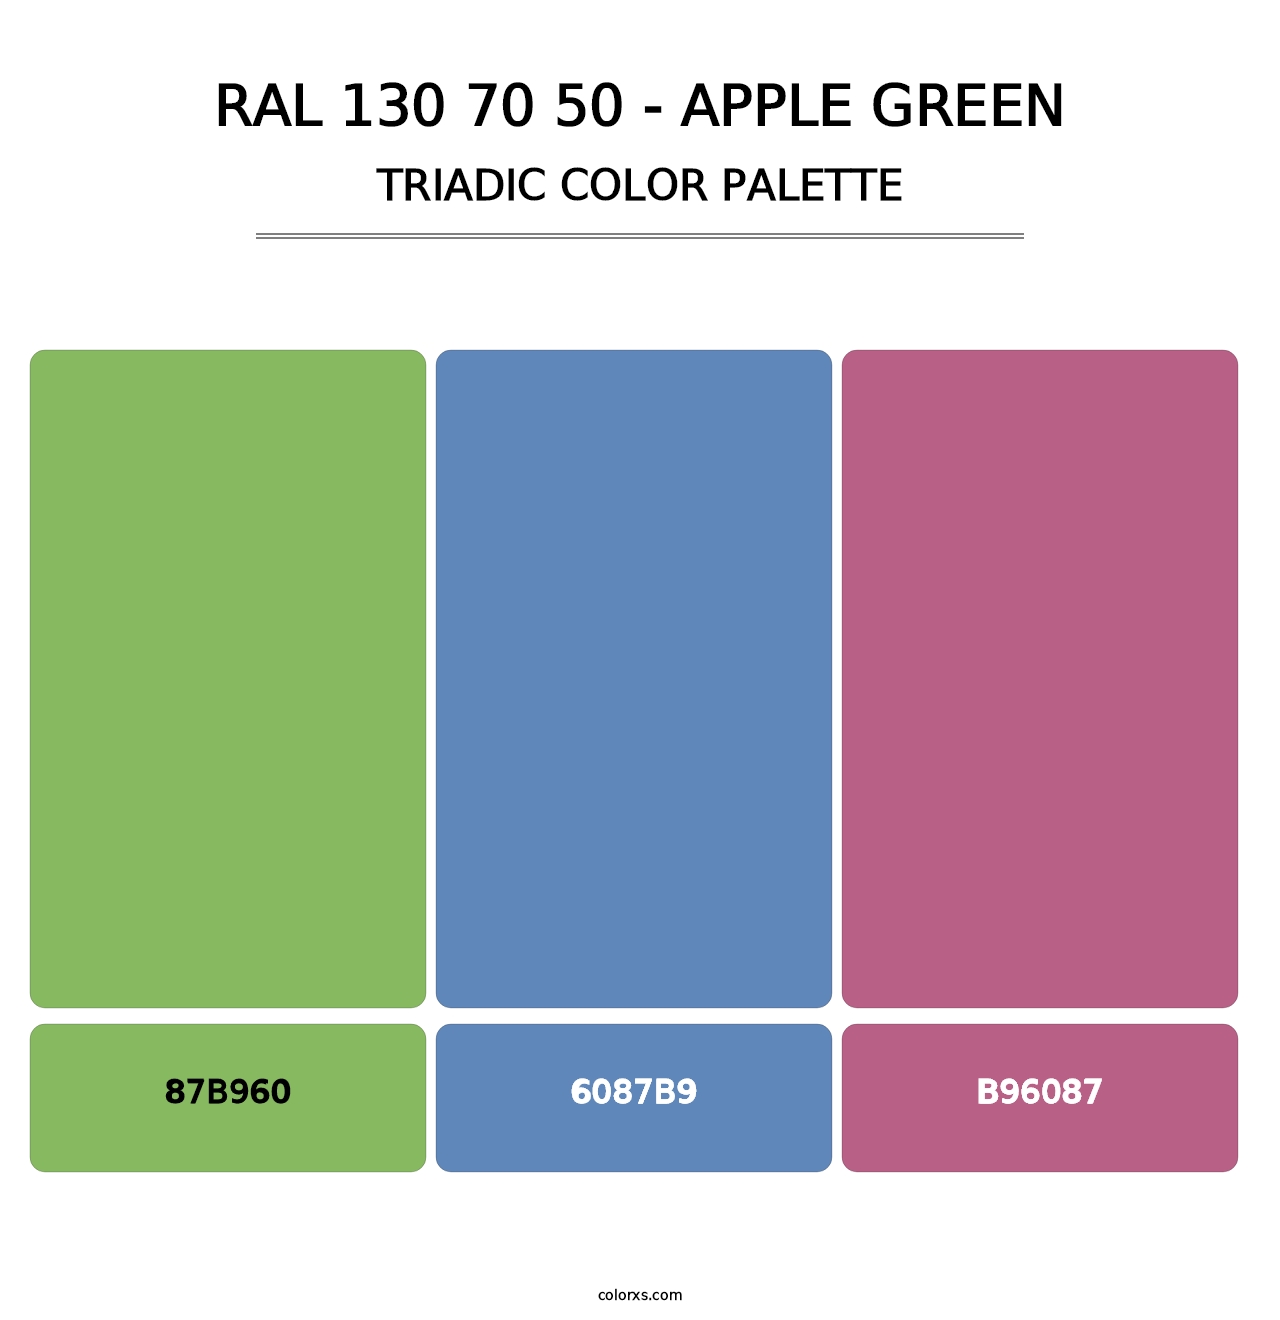 RAL 130 70 50 - Apple Green - Triadic Color Palette